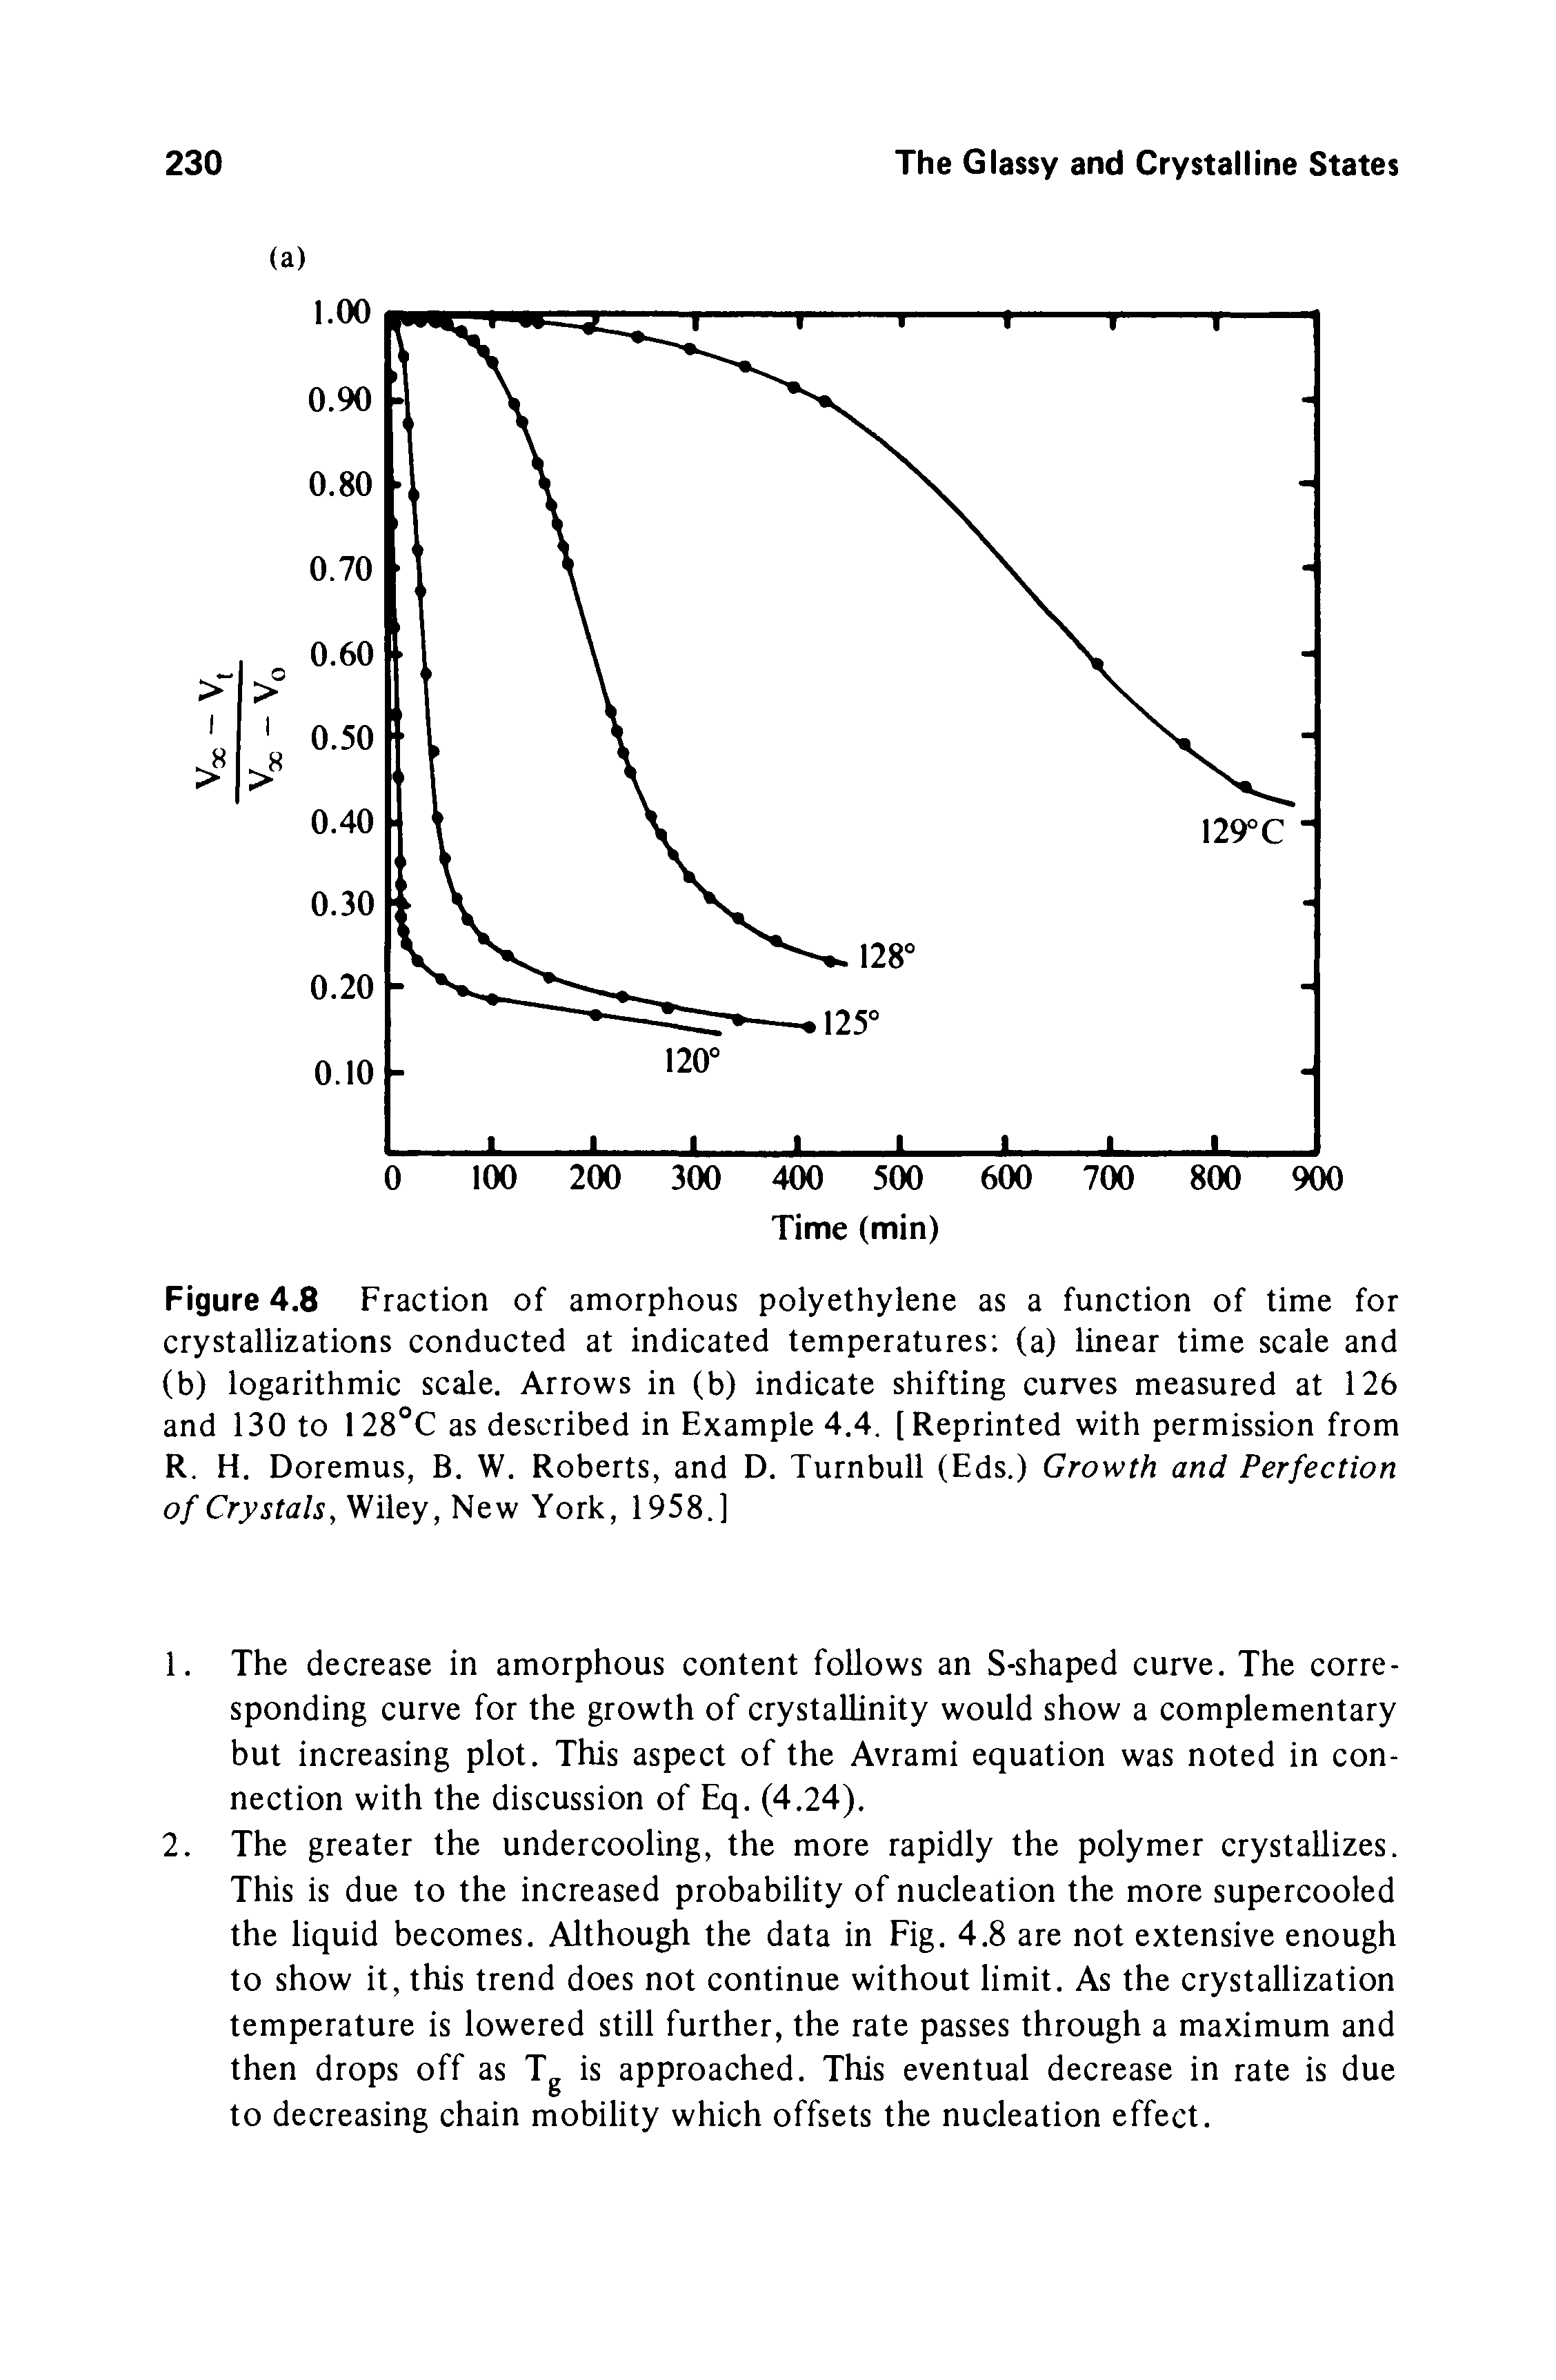 Figure 4.8 Fraction of amorphous polyethylene as a function of time for crystallizations conducted at indicated temperatures (a) linear time scale and (b) logarithmic scale. Arrows in (b) indicate shifting curves measured at 126 and 130 to 128°C as described in Example 4.4. [Reprinted with permission from R. H. Doremus, B. W. Roberts, and D. Turnbull (Eds.) Growth and Perfection of Crystals, Wiley, New York, 1958.]...